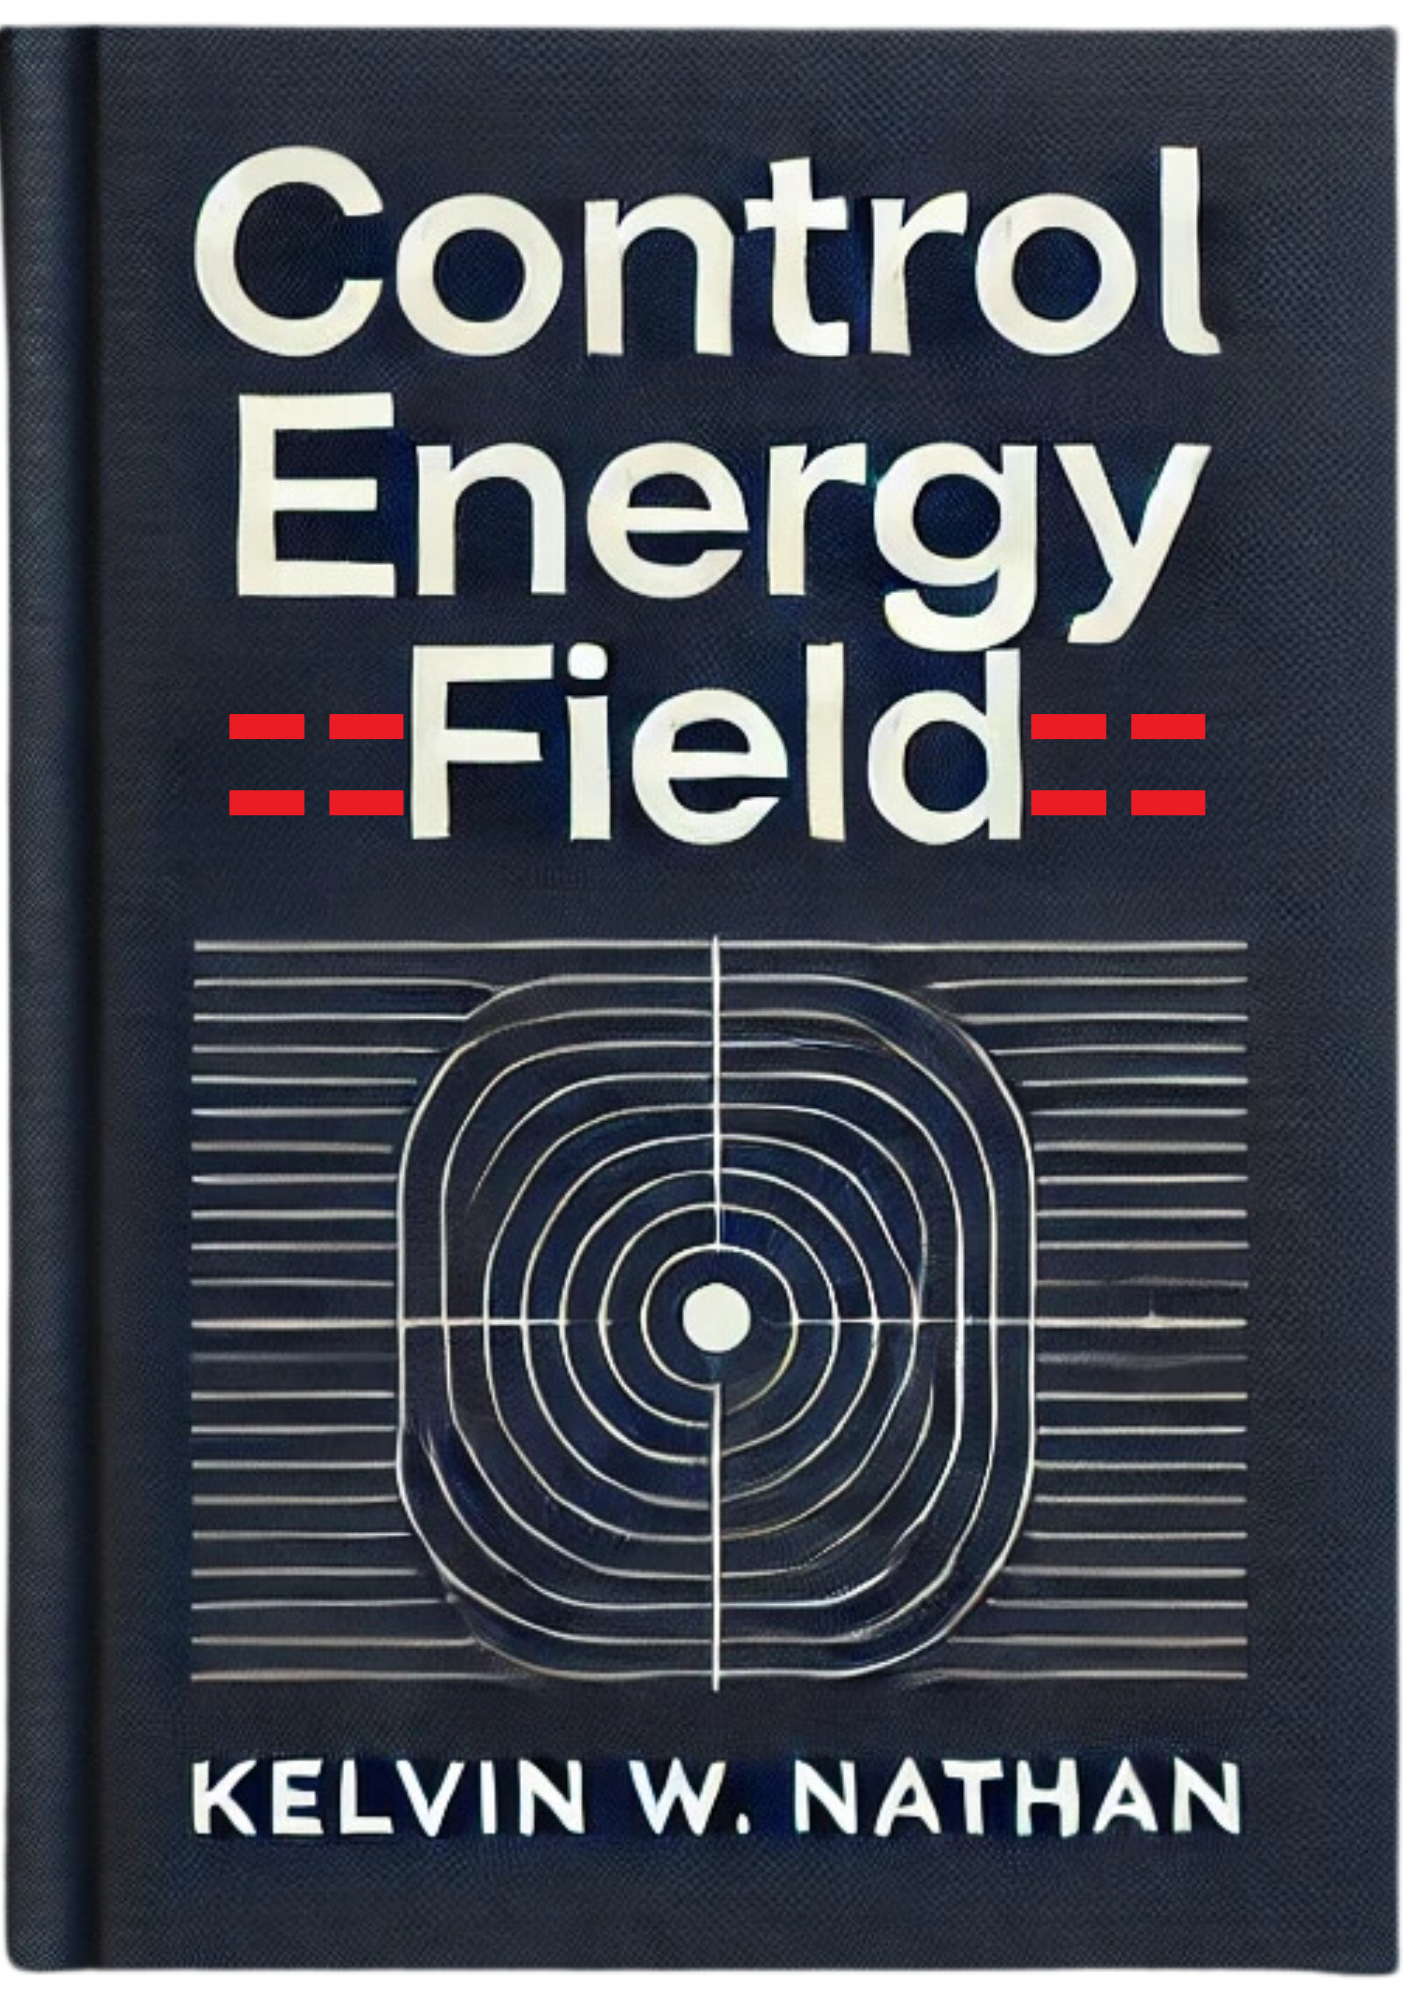 Control Energy Field: How to Mentally Control and Govern Your Life